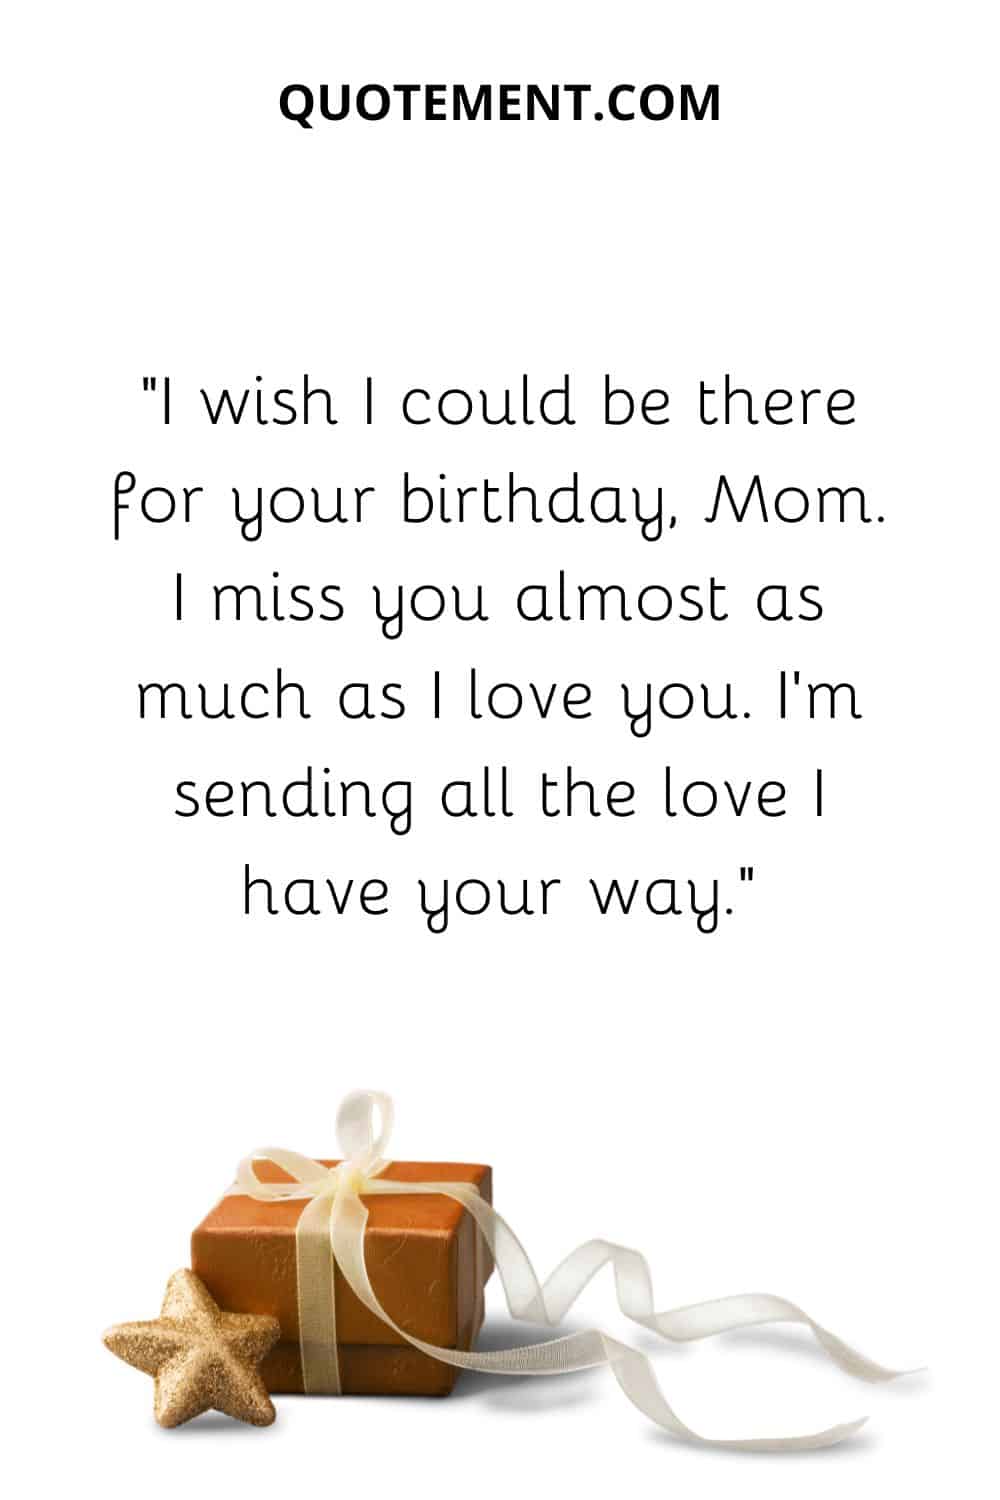 I wish I could be there for your birthday, Mom